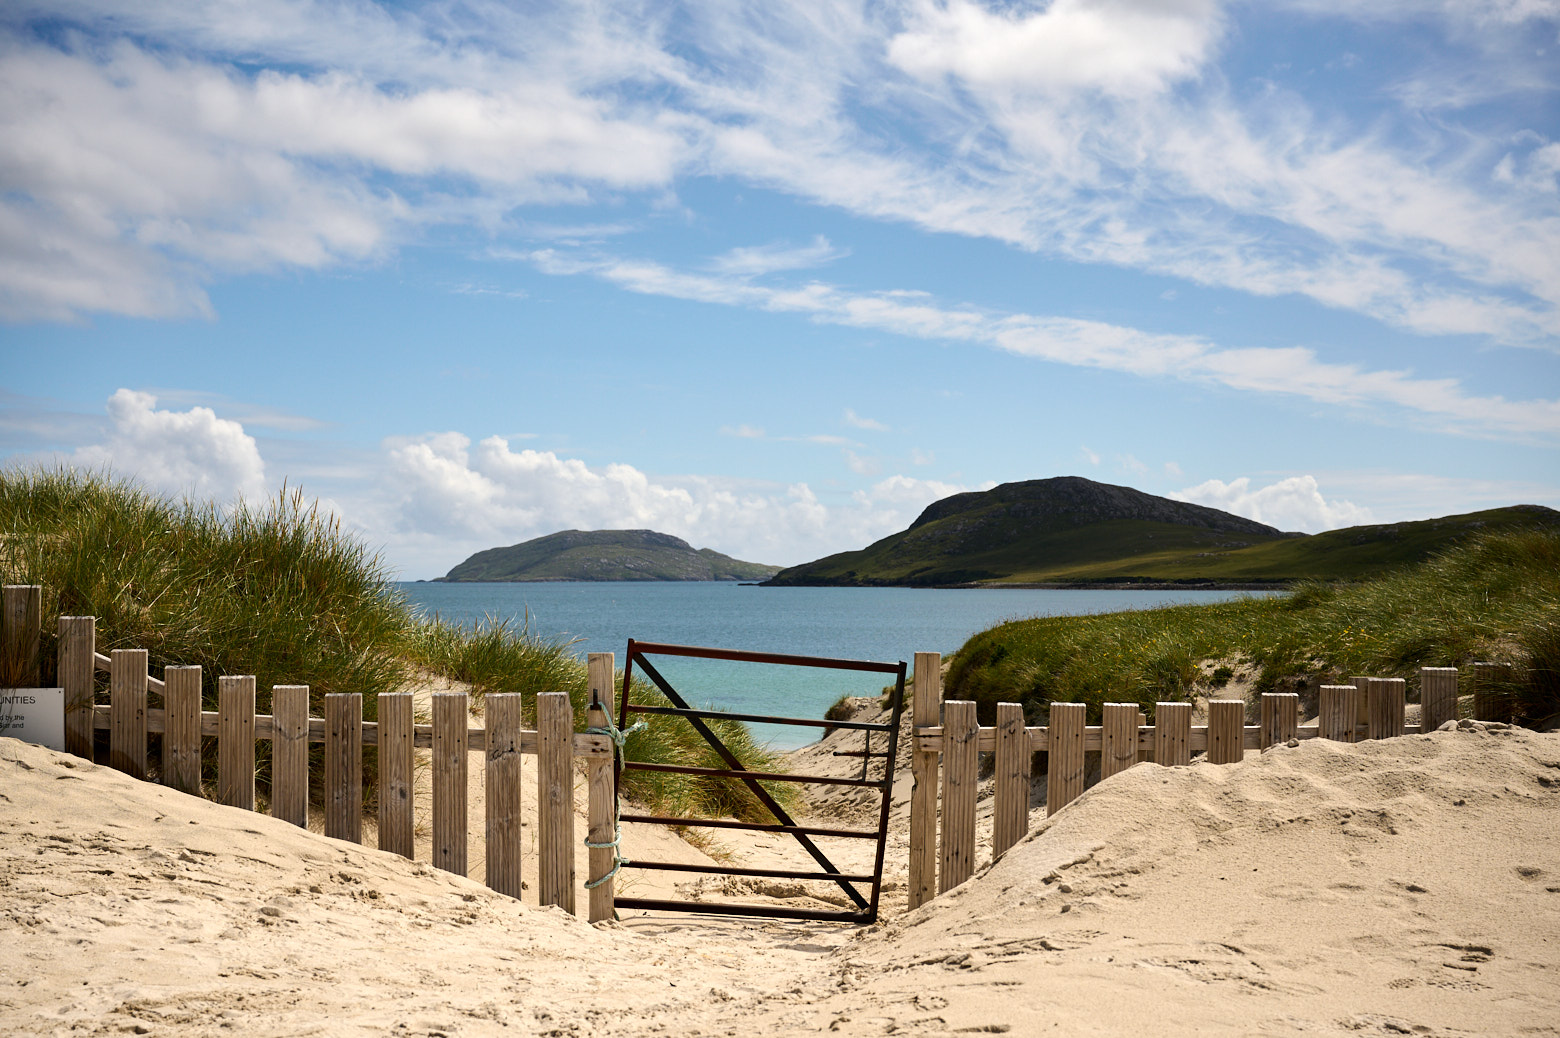 The famous gate at Vatersay beach - Barra, Outer Hebrides in Soctland